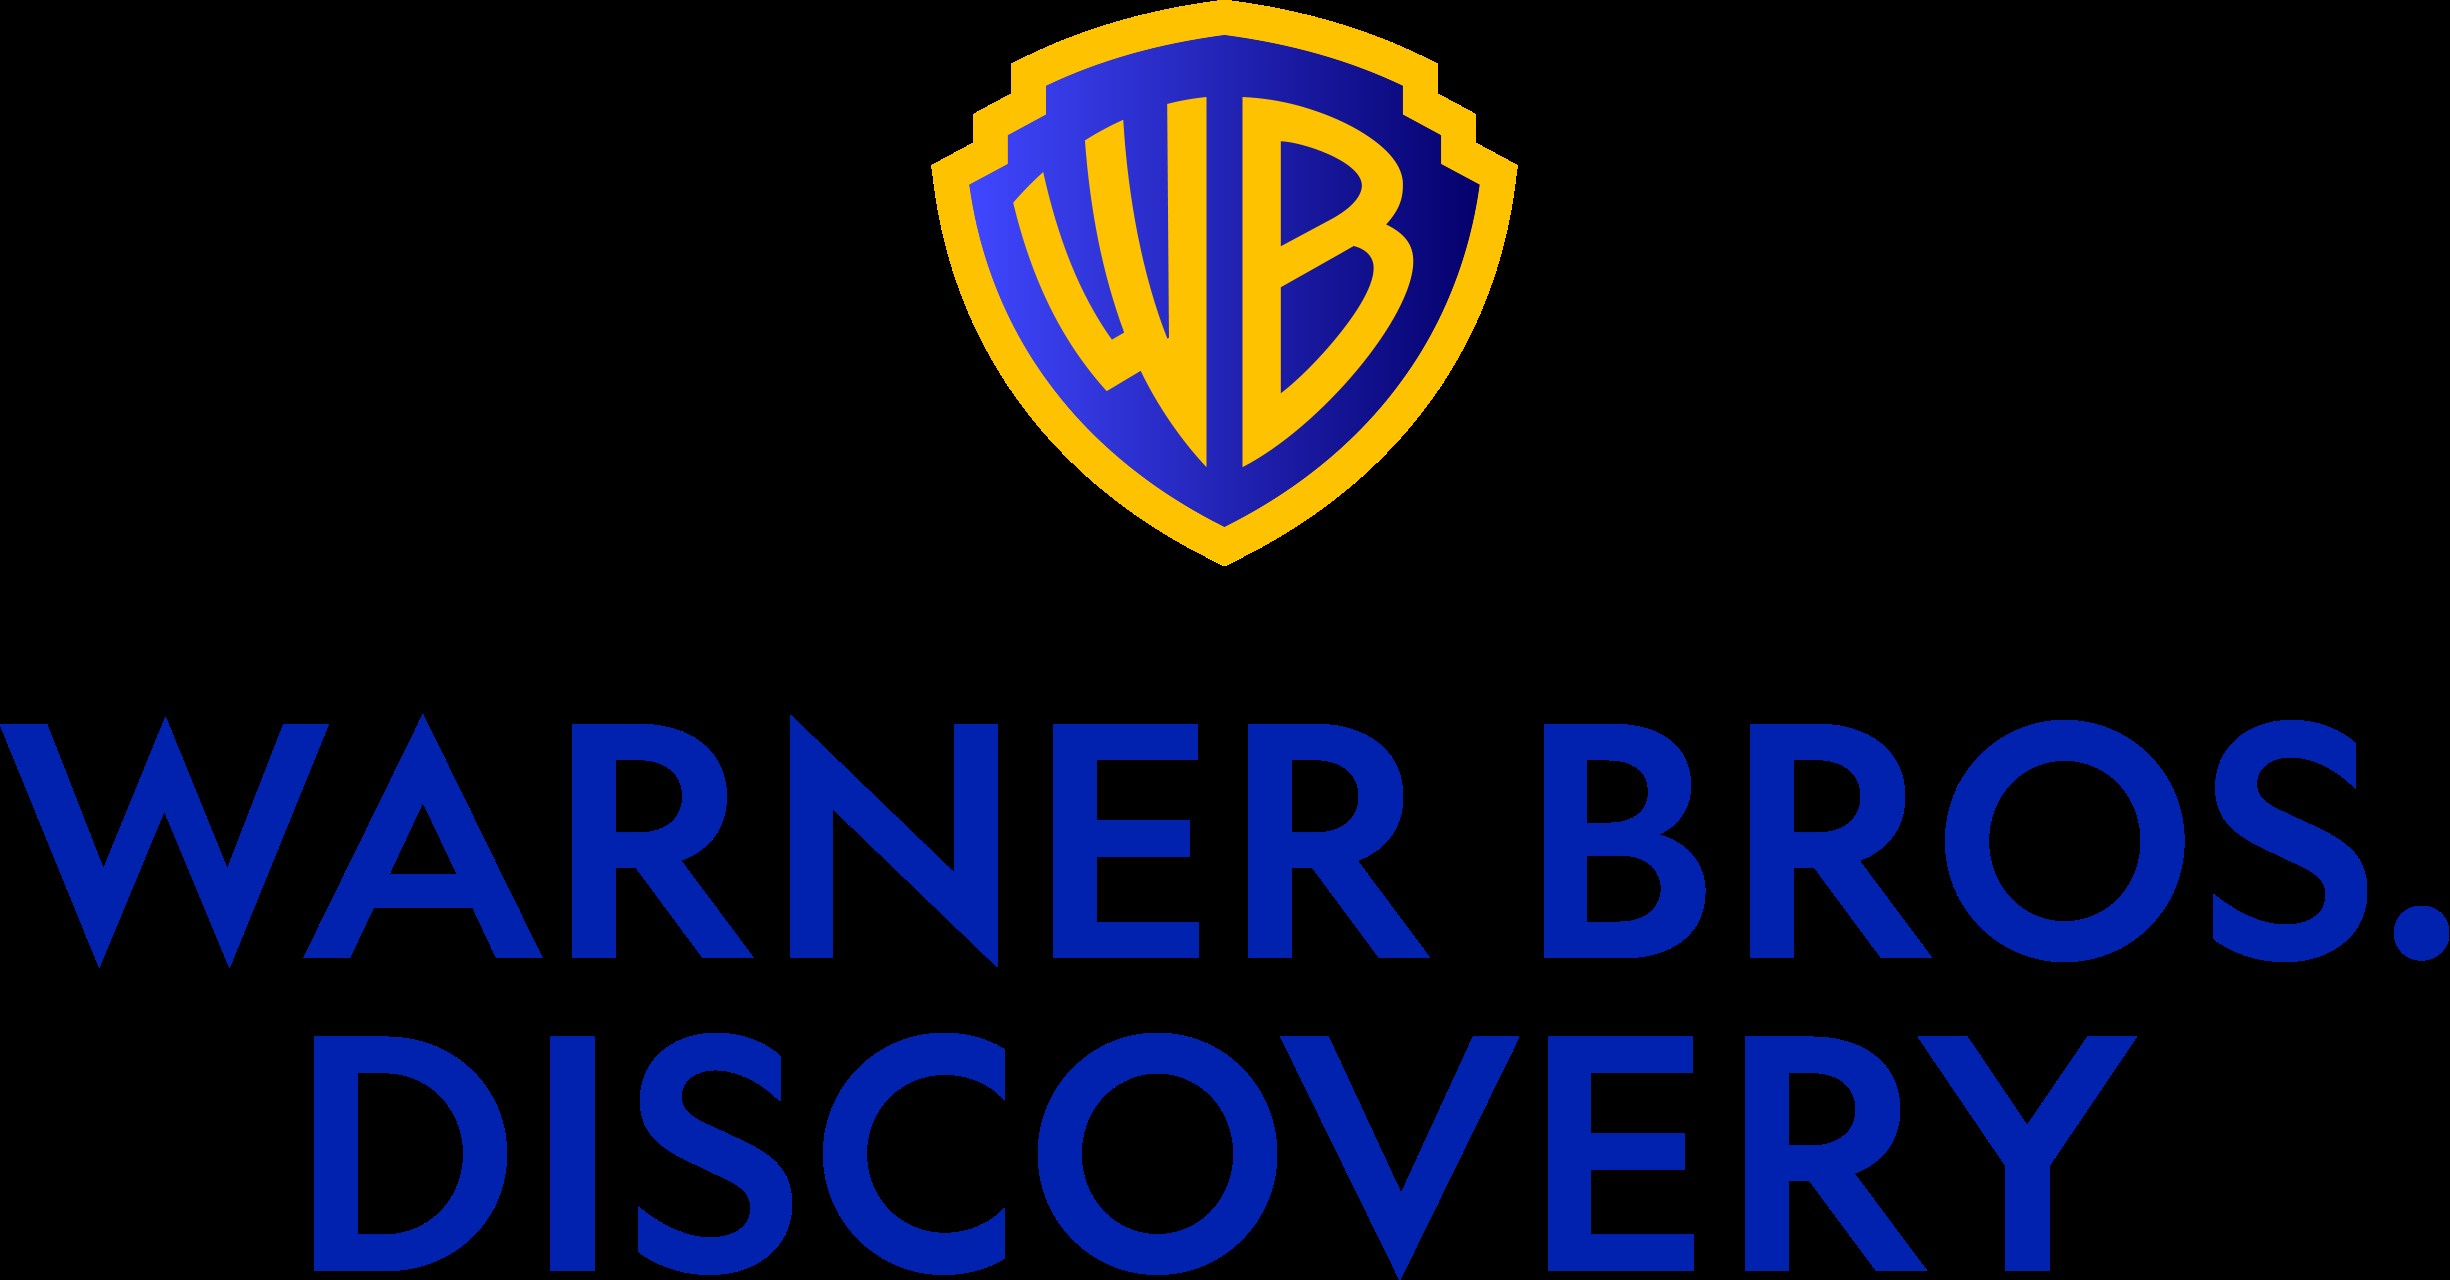 VideoAmp and Warner Bros. Discovery Announce Audience Measurement Agreement